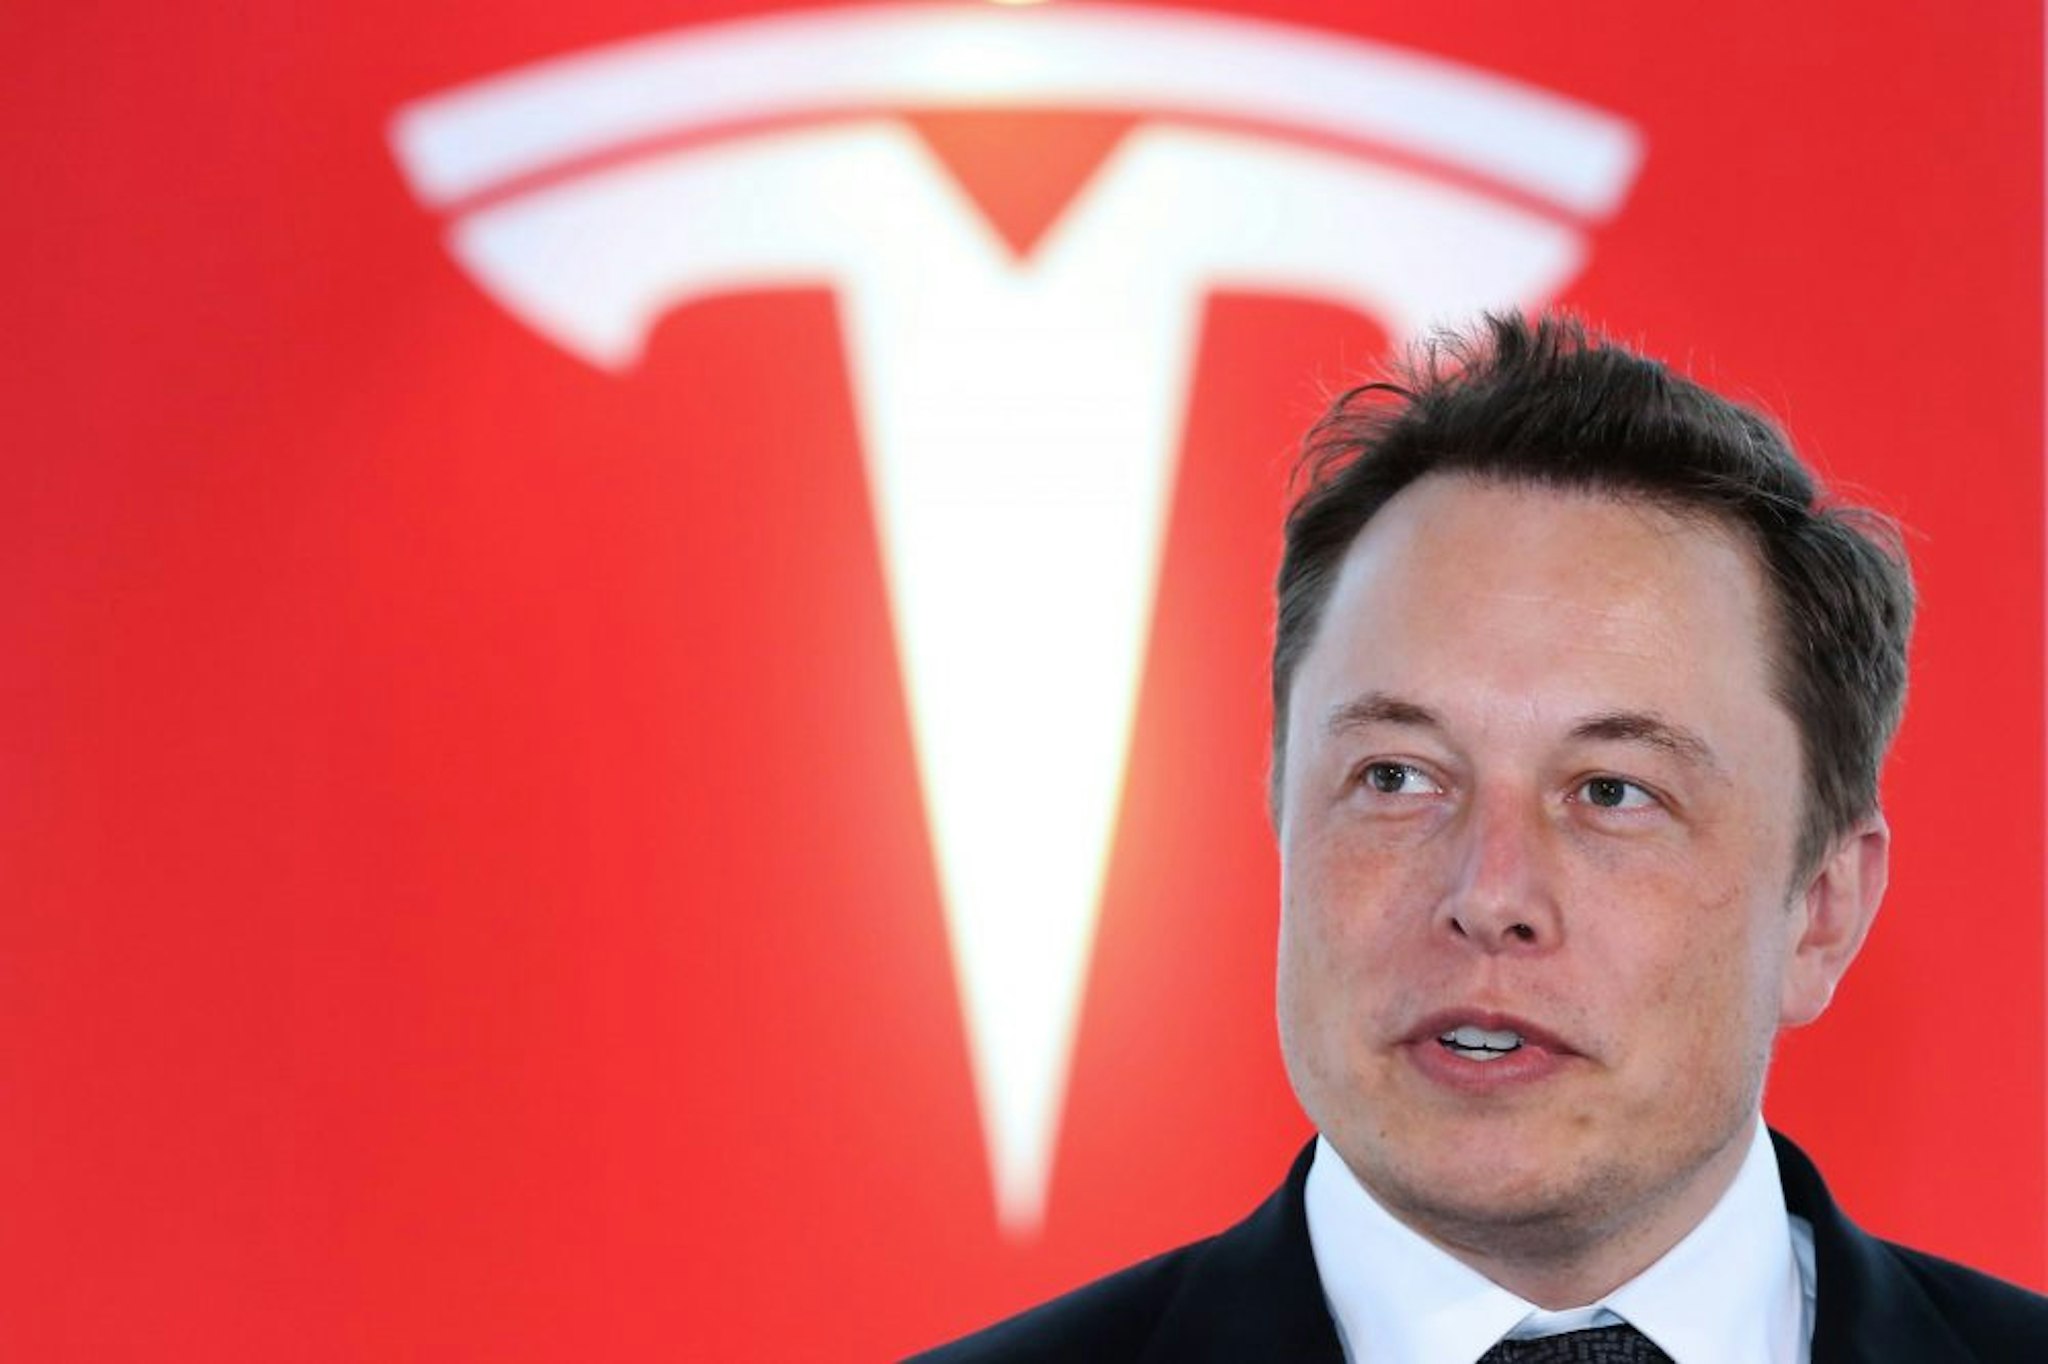 Elon Musk, co-founder and chief executive officer of Tesla Motors Inc., attends a key delivery ceremony of the company's premium electric sedan Model S vehicles to customers in Tokyo, Japan, on Monday, Sept. 8, 2014. Tesla may partner with Toyota Motor Corp. again in the future, Musk said.